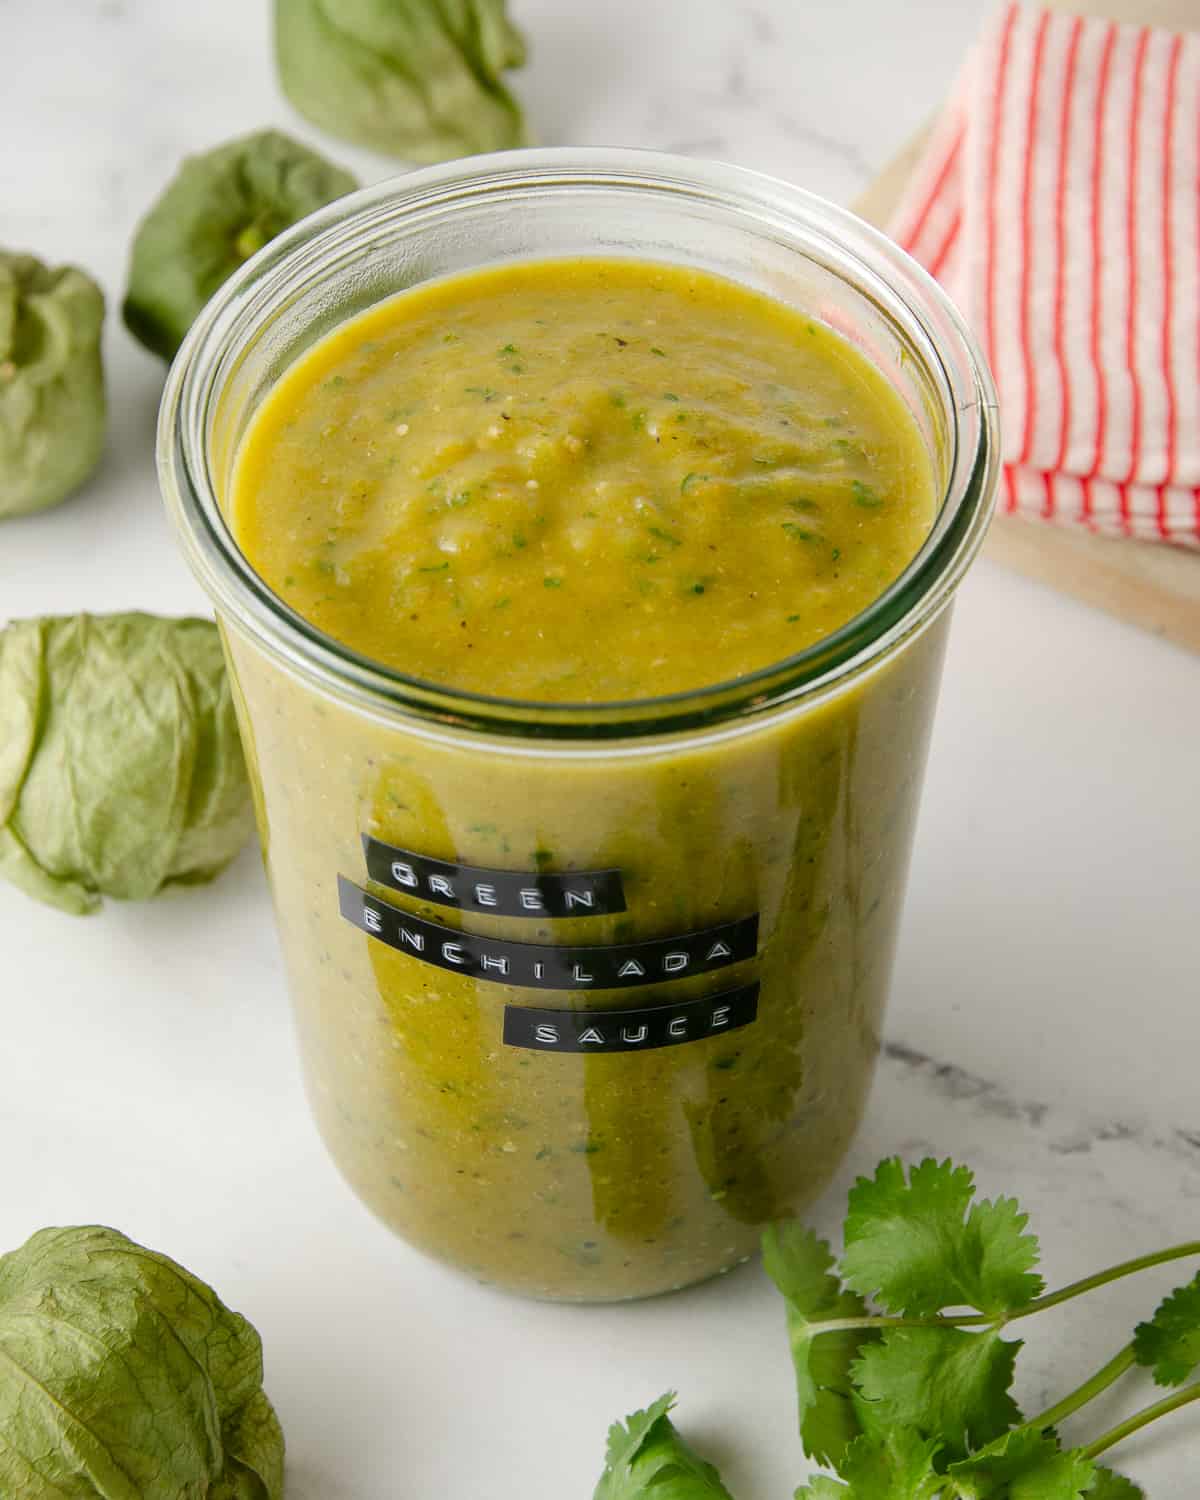 An overhead view of a large jar of green enchilada sauce with tomatillos and cilantro to the side.